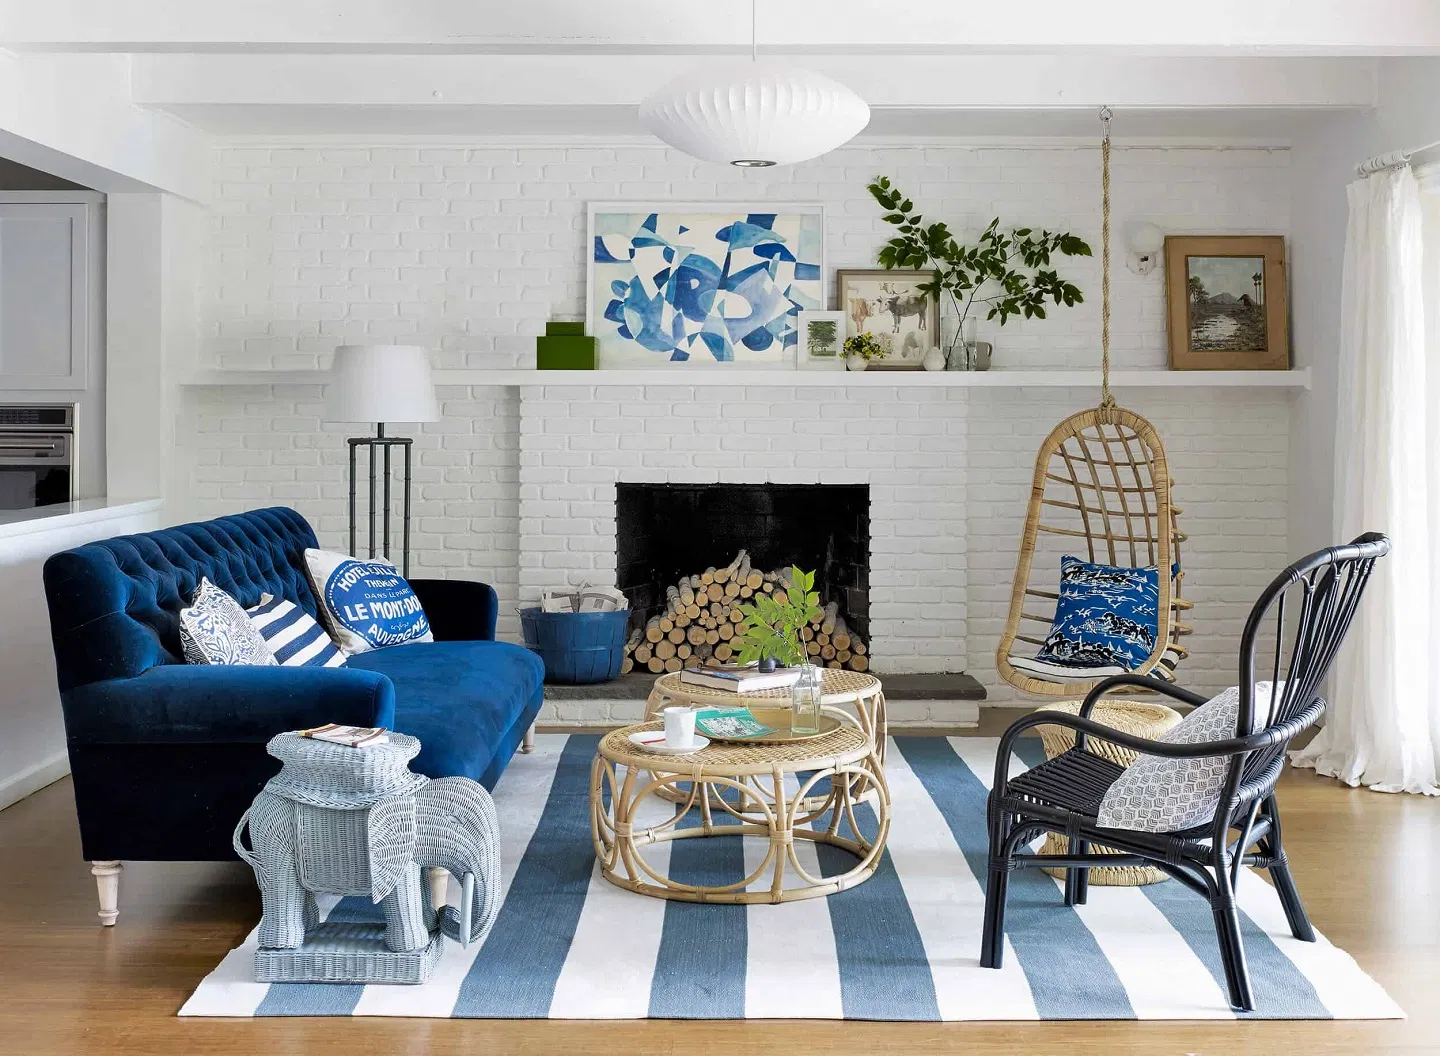 2. Blue and White: Tranquil Retreat